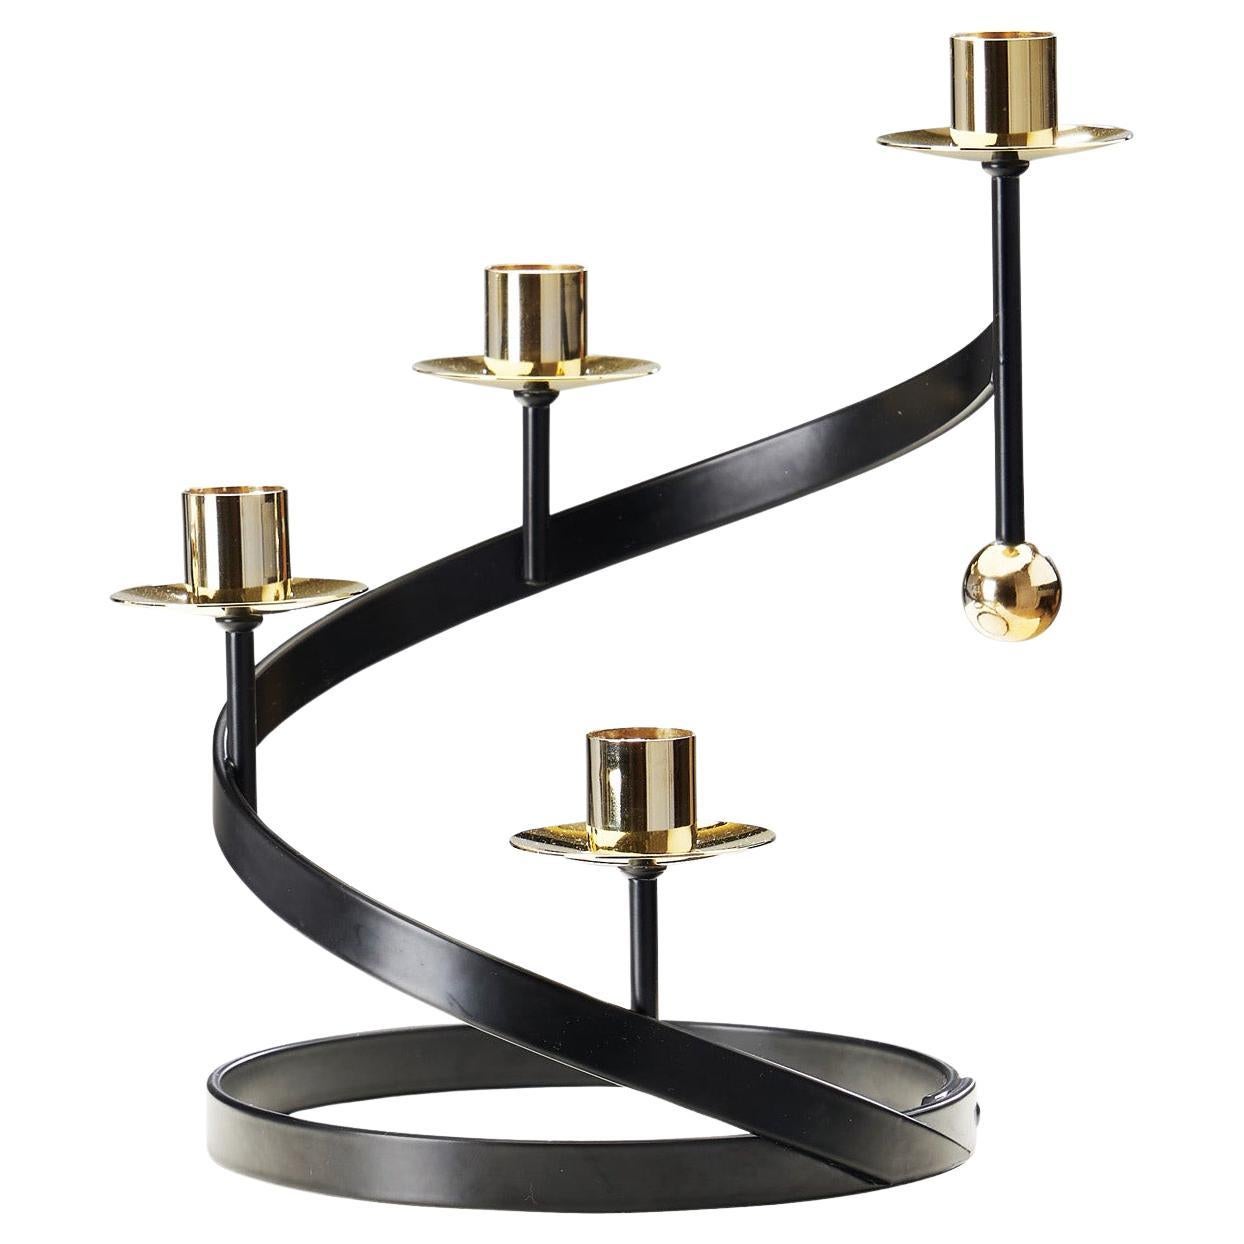 Gunnar Ander "Sonata" Candle Holder for Ystad Metall, Sweden 1950s For Sale